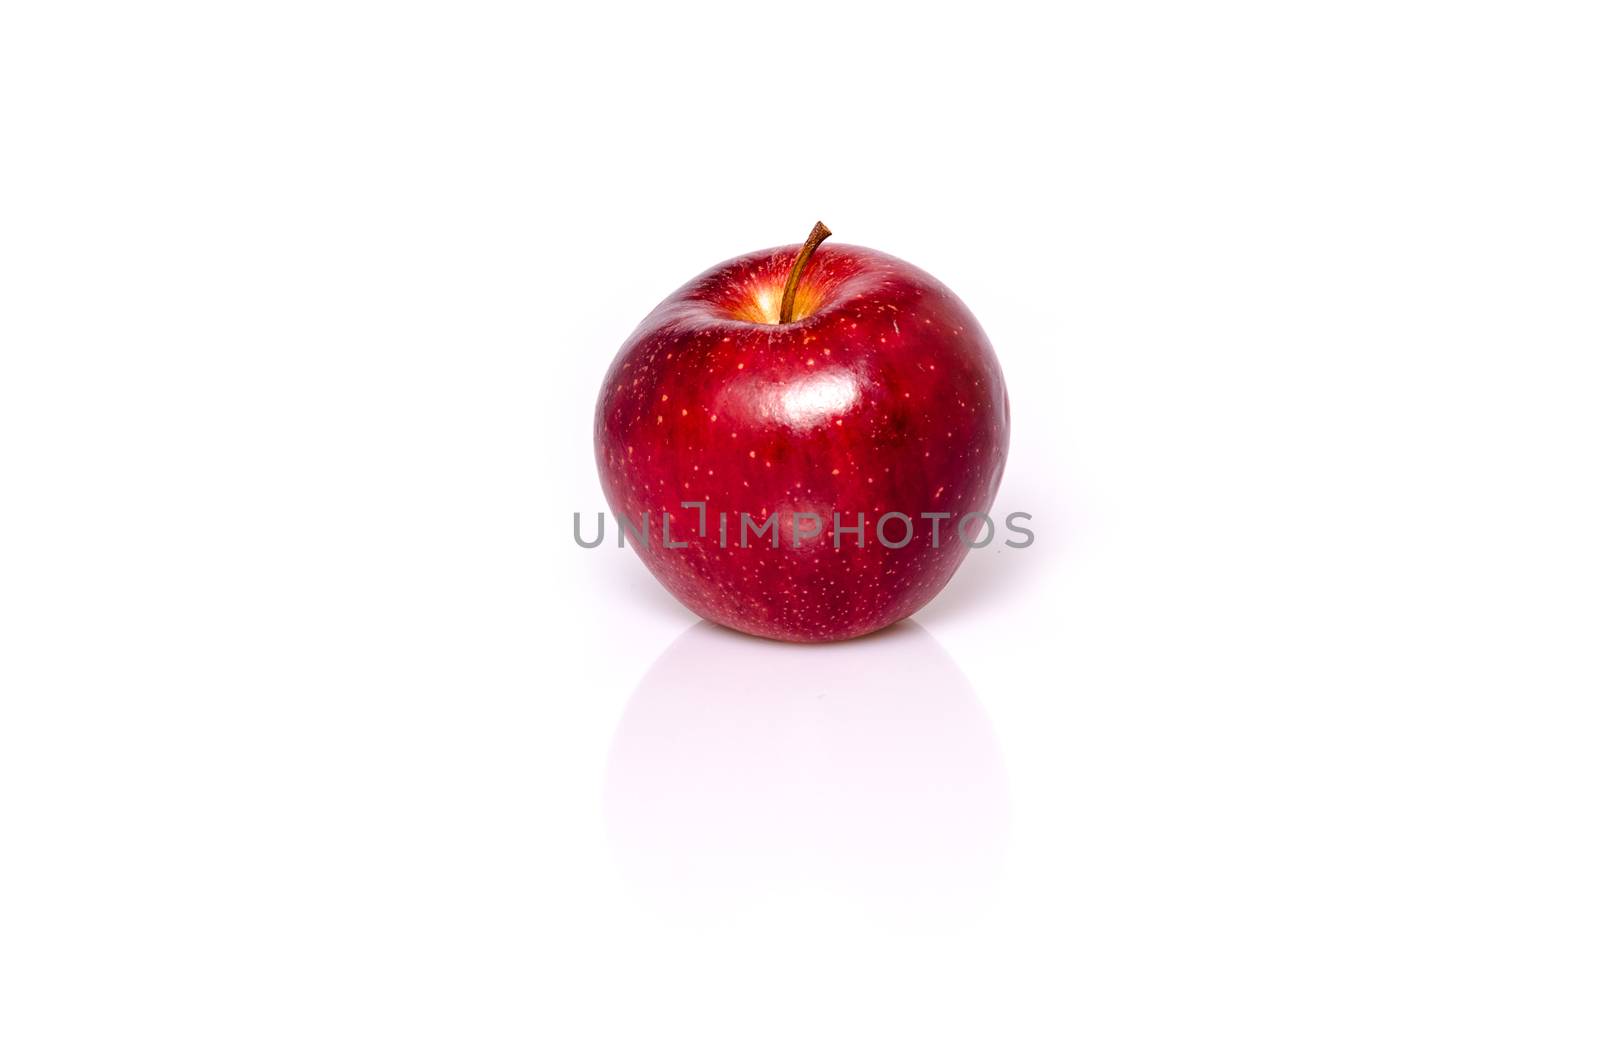 Single red apple by franky242